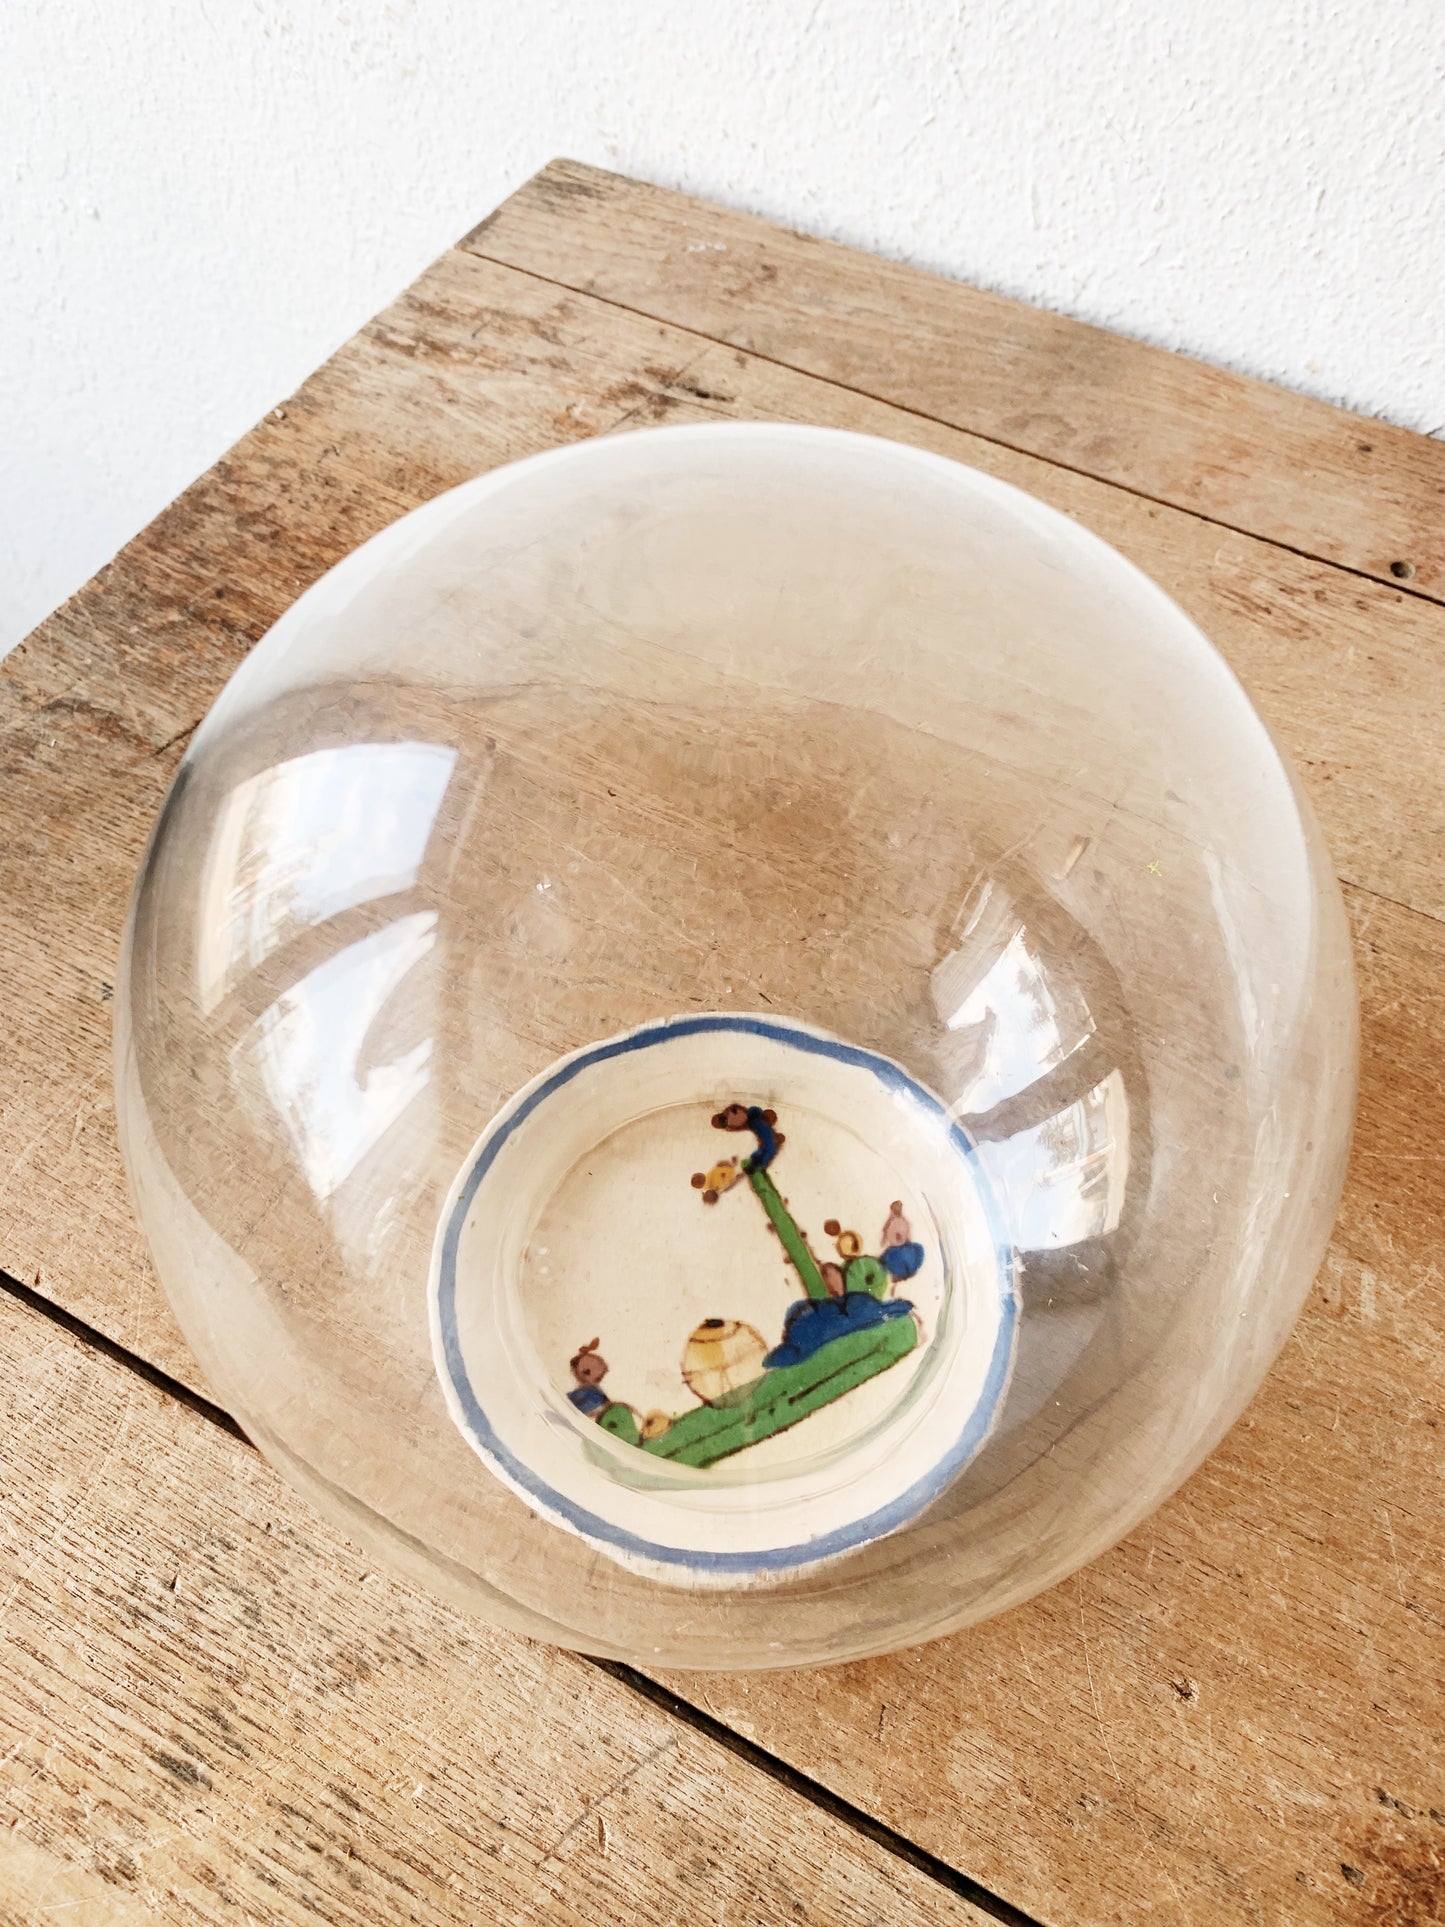 Vintage Hand Painted Dish with Glass Globe Terrarium